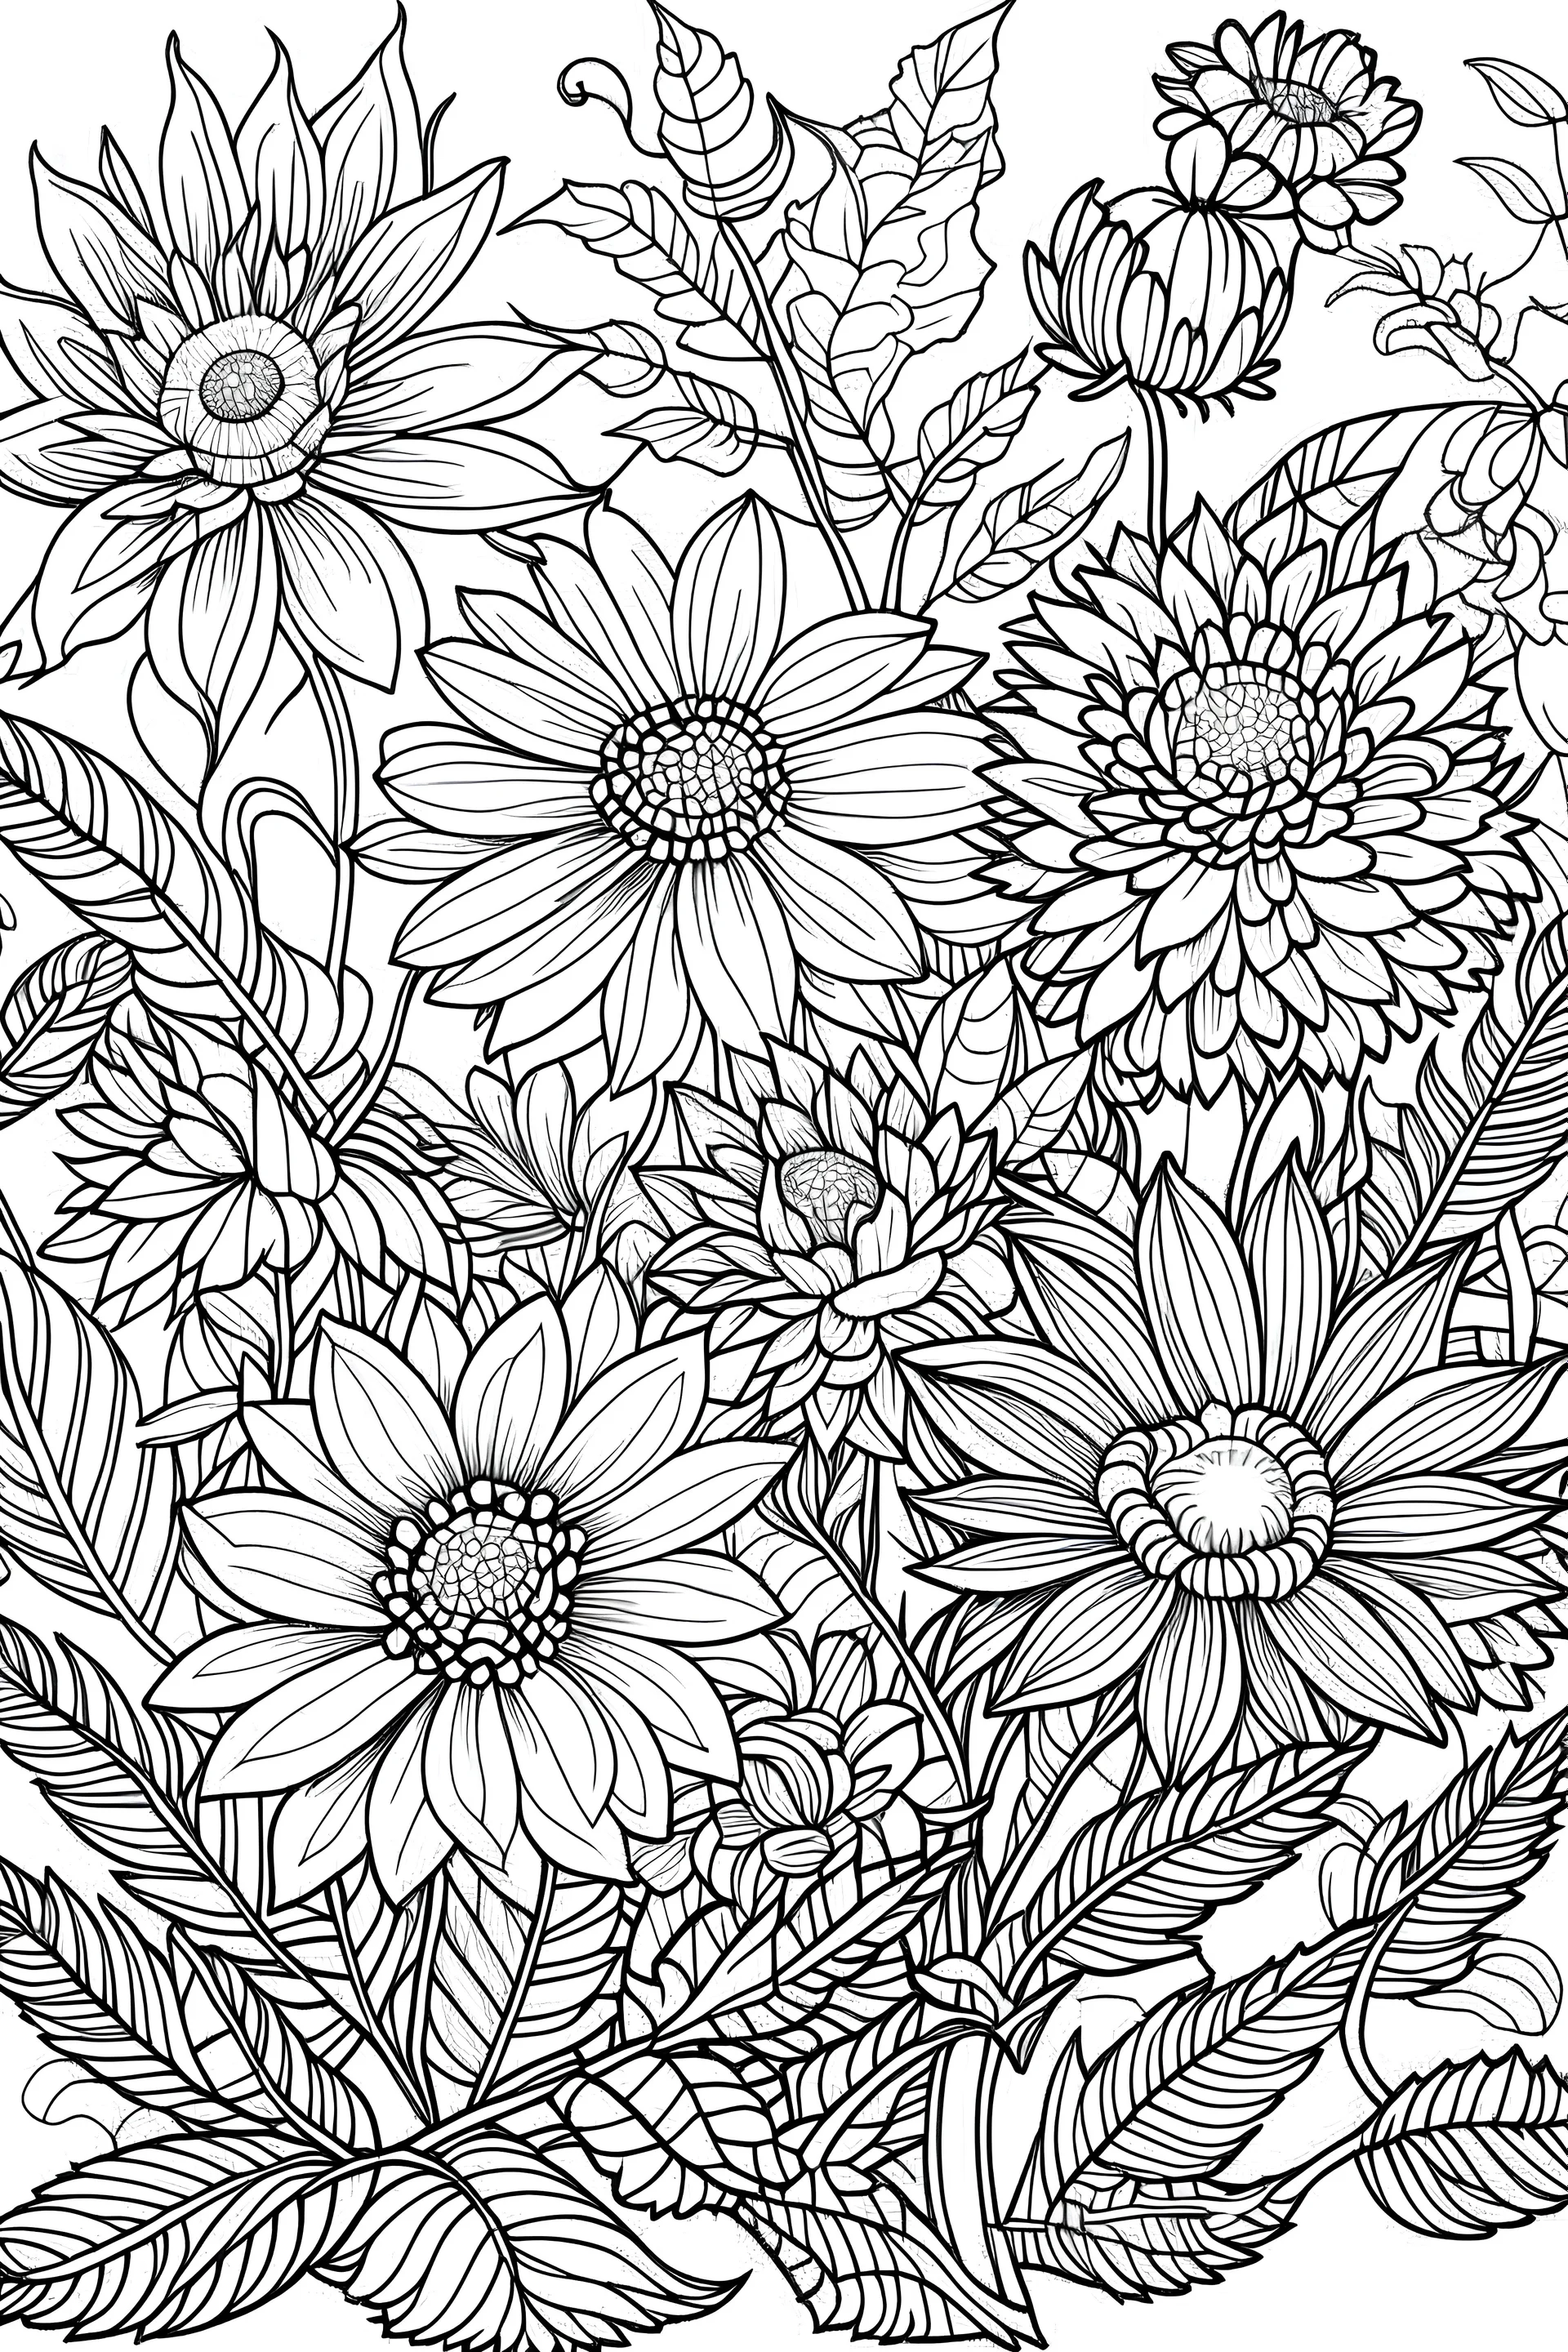 Colouring book flowers